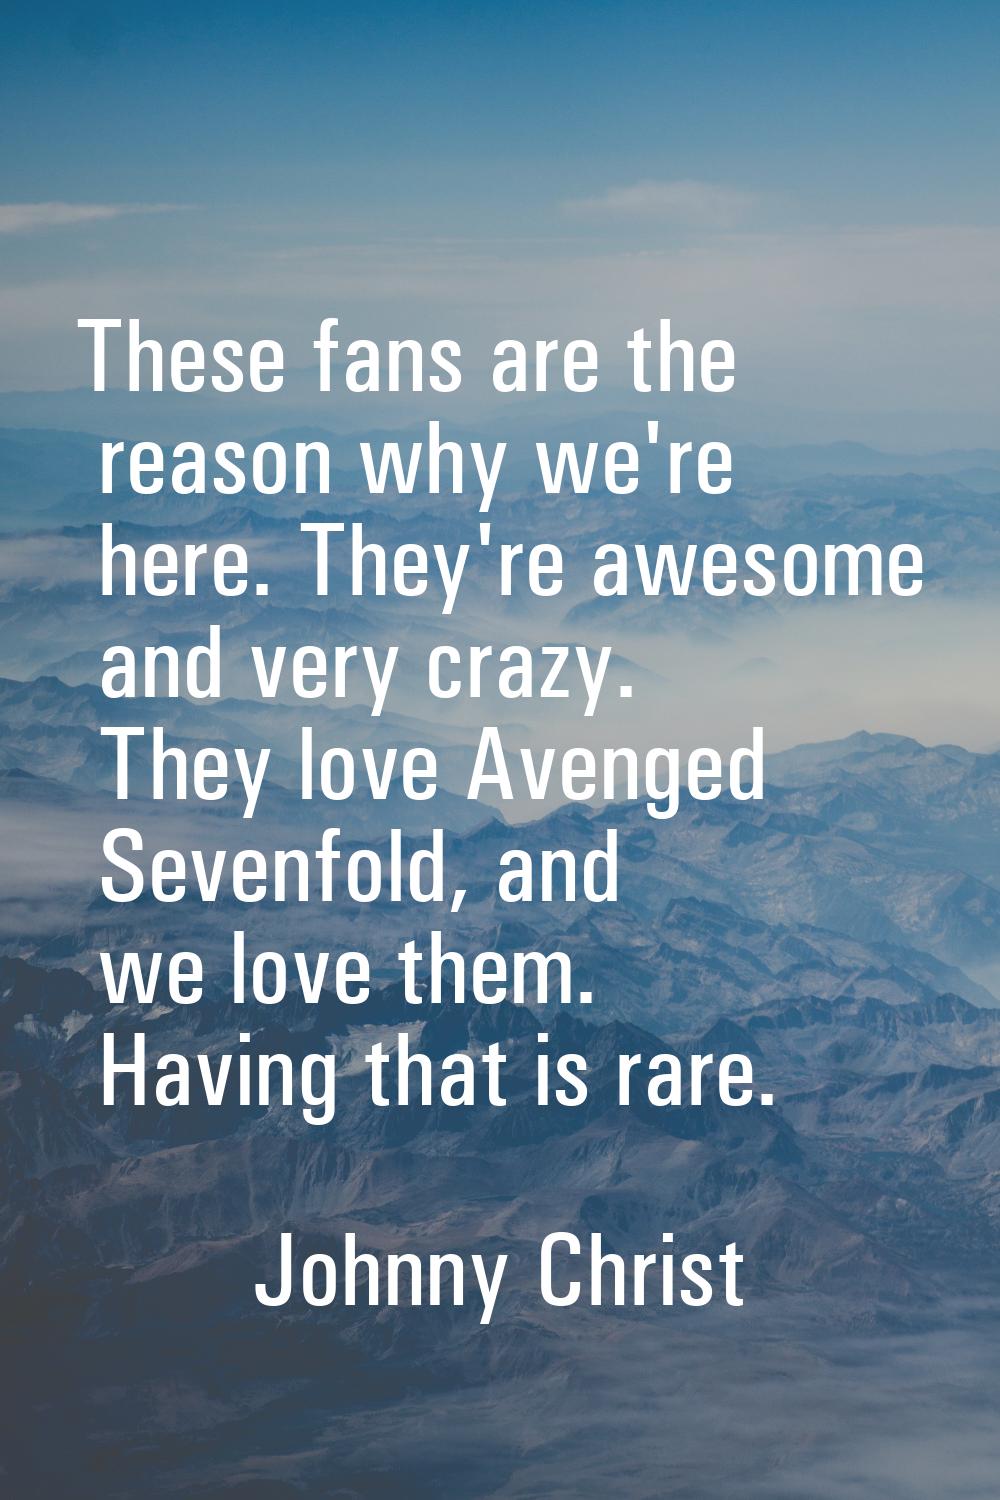 These fans are the reason why we're here. They're awesome and very crazy. They love Avenged Sevenfo